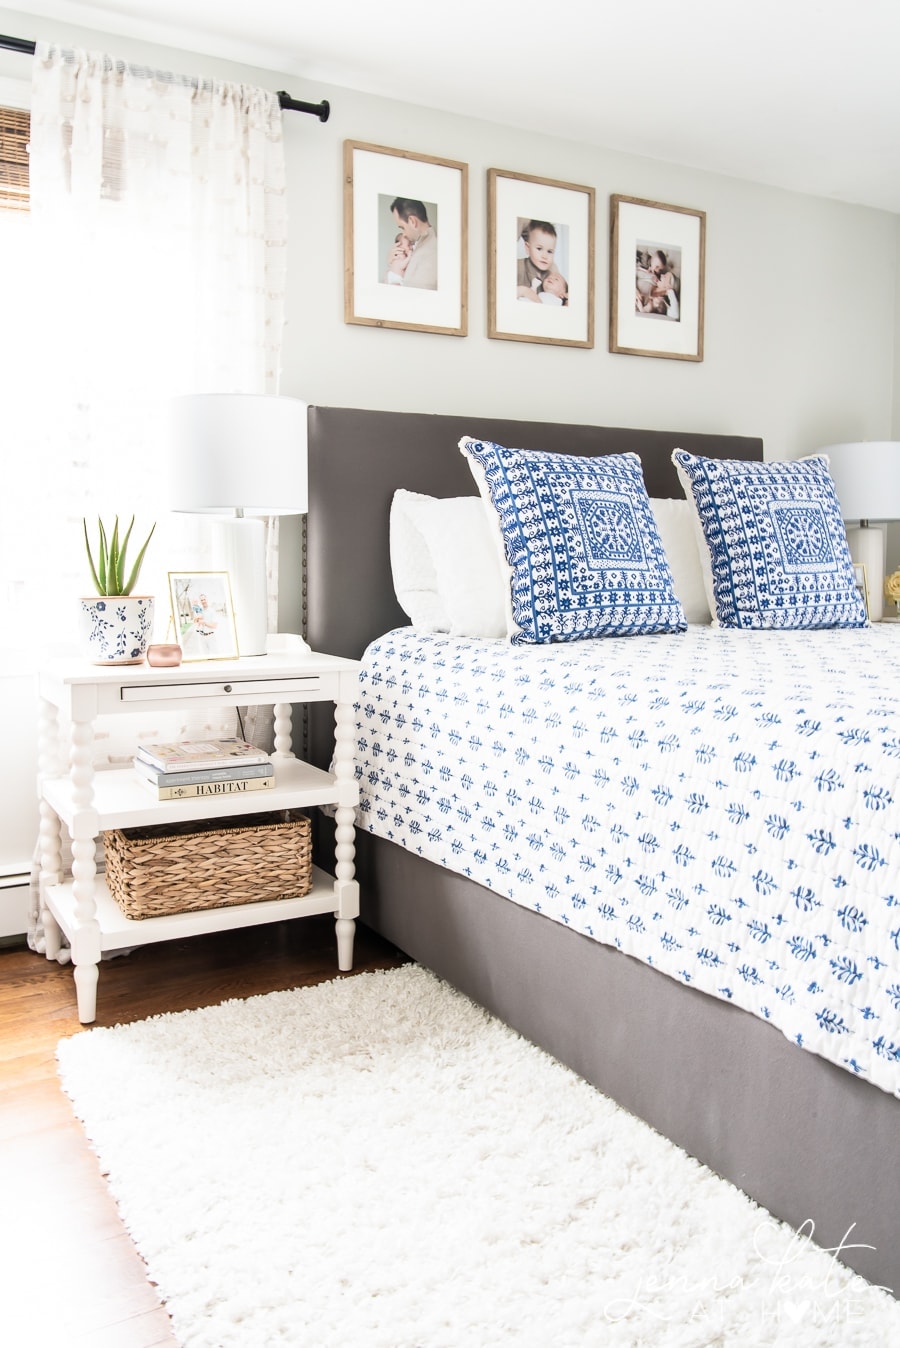 A bed with a grey headboard, blue & pillows and bedding, a white nightstand and white rug.